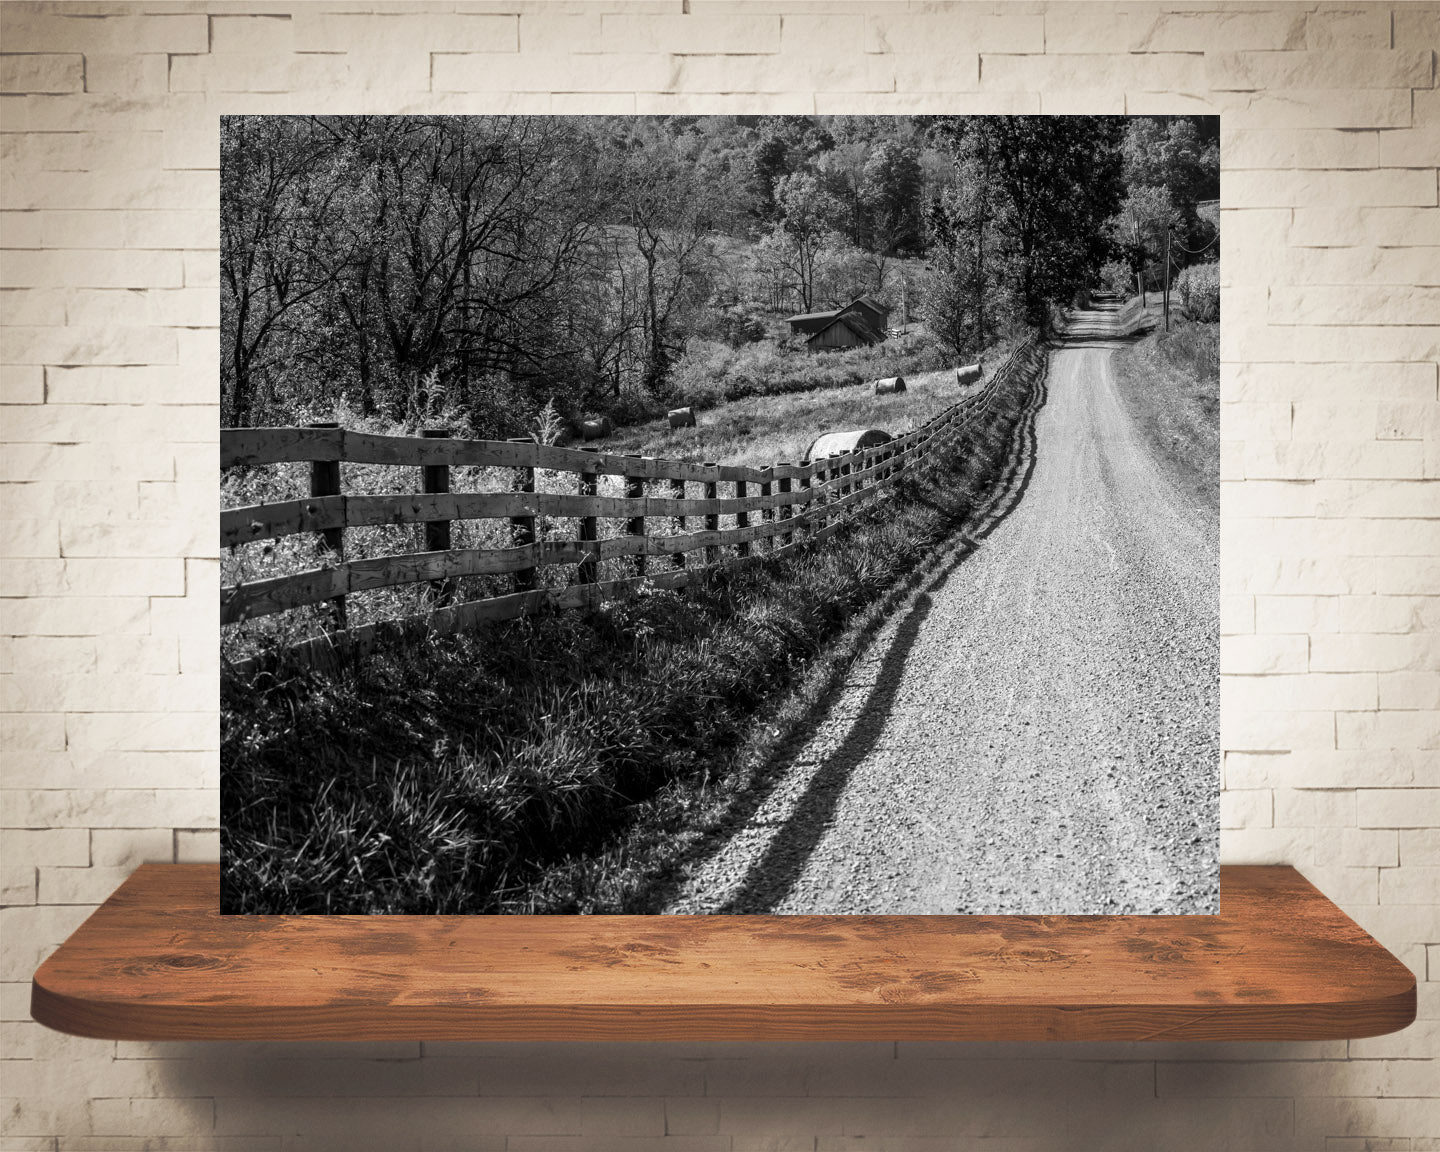 Country Road Photograph Black White